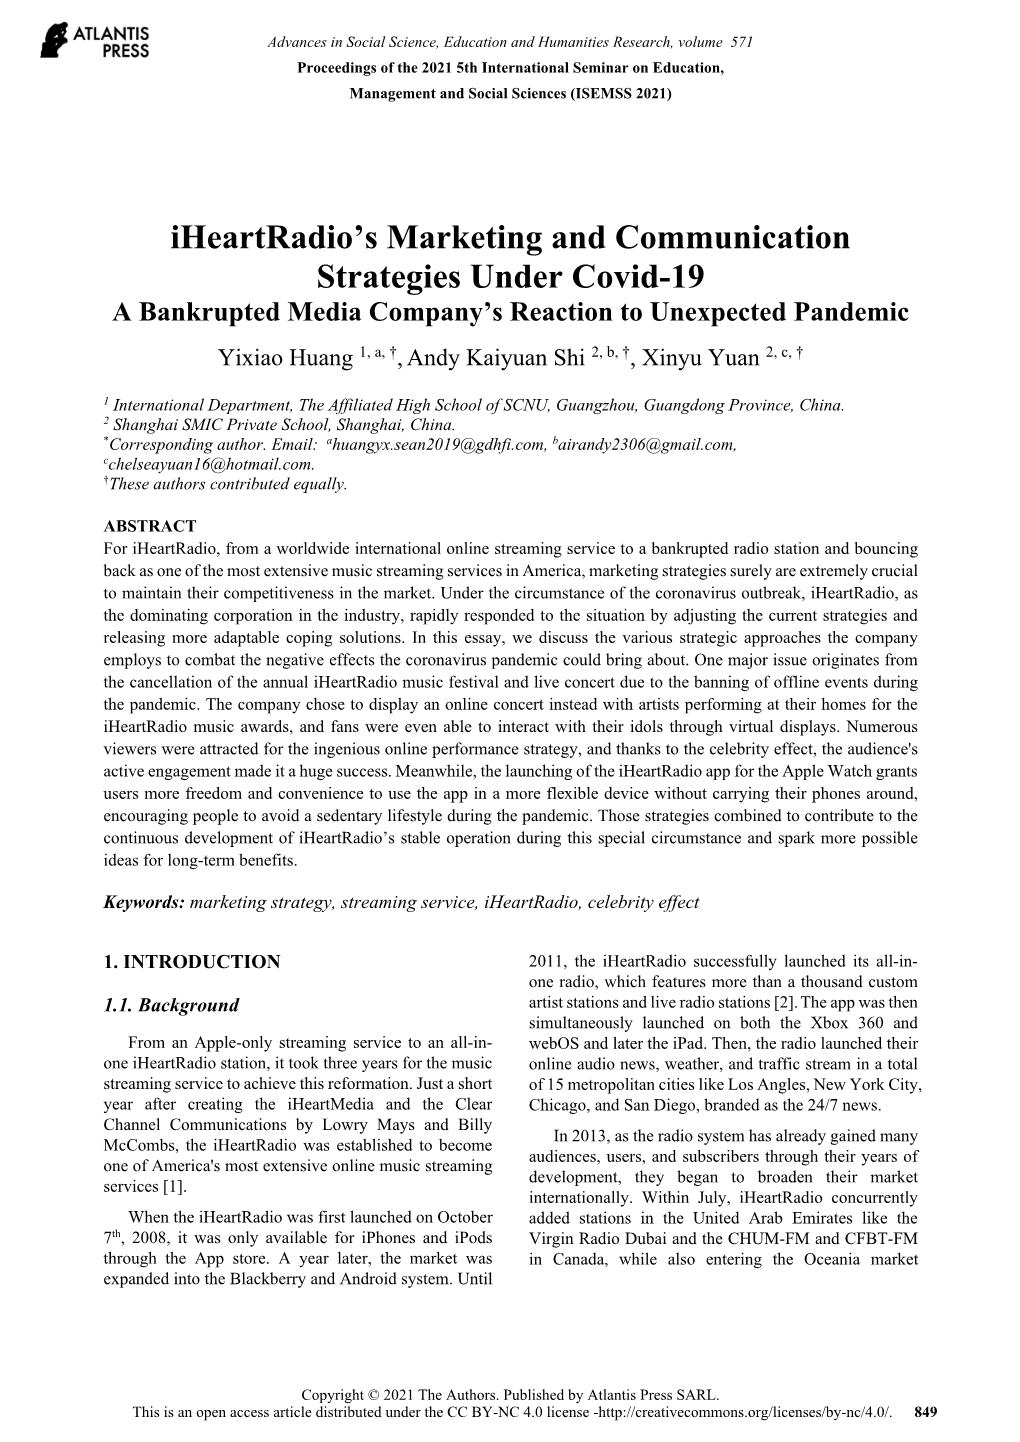 Iheartradio's Marketing and Communication Strategies Under